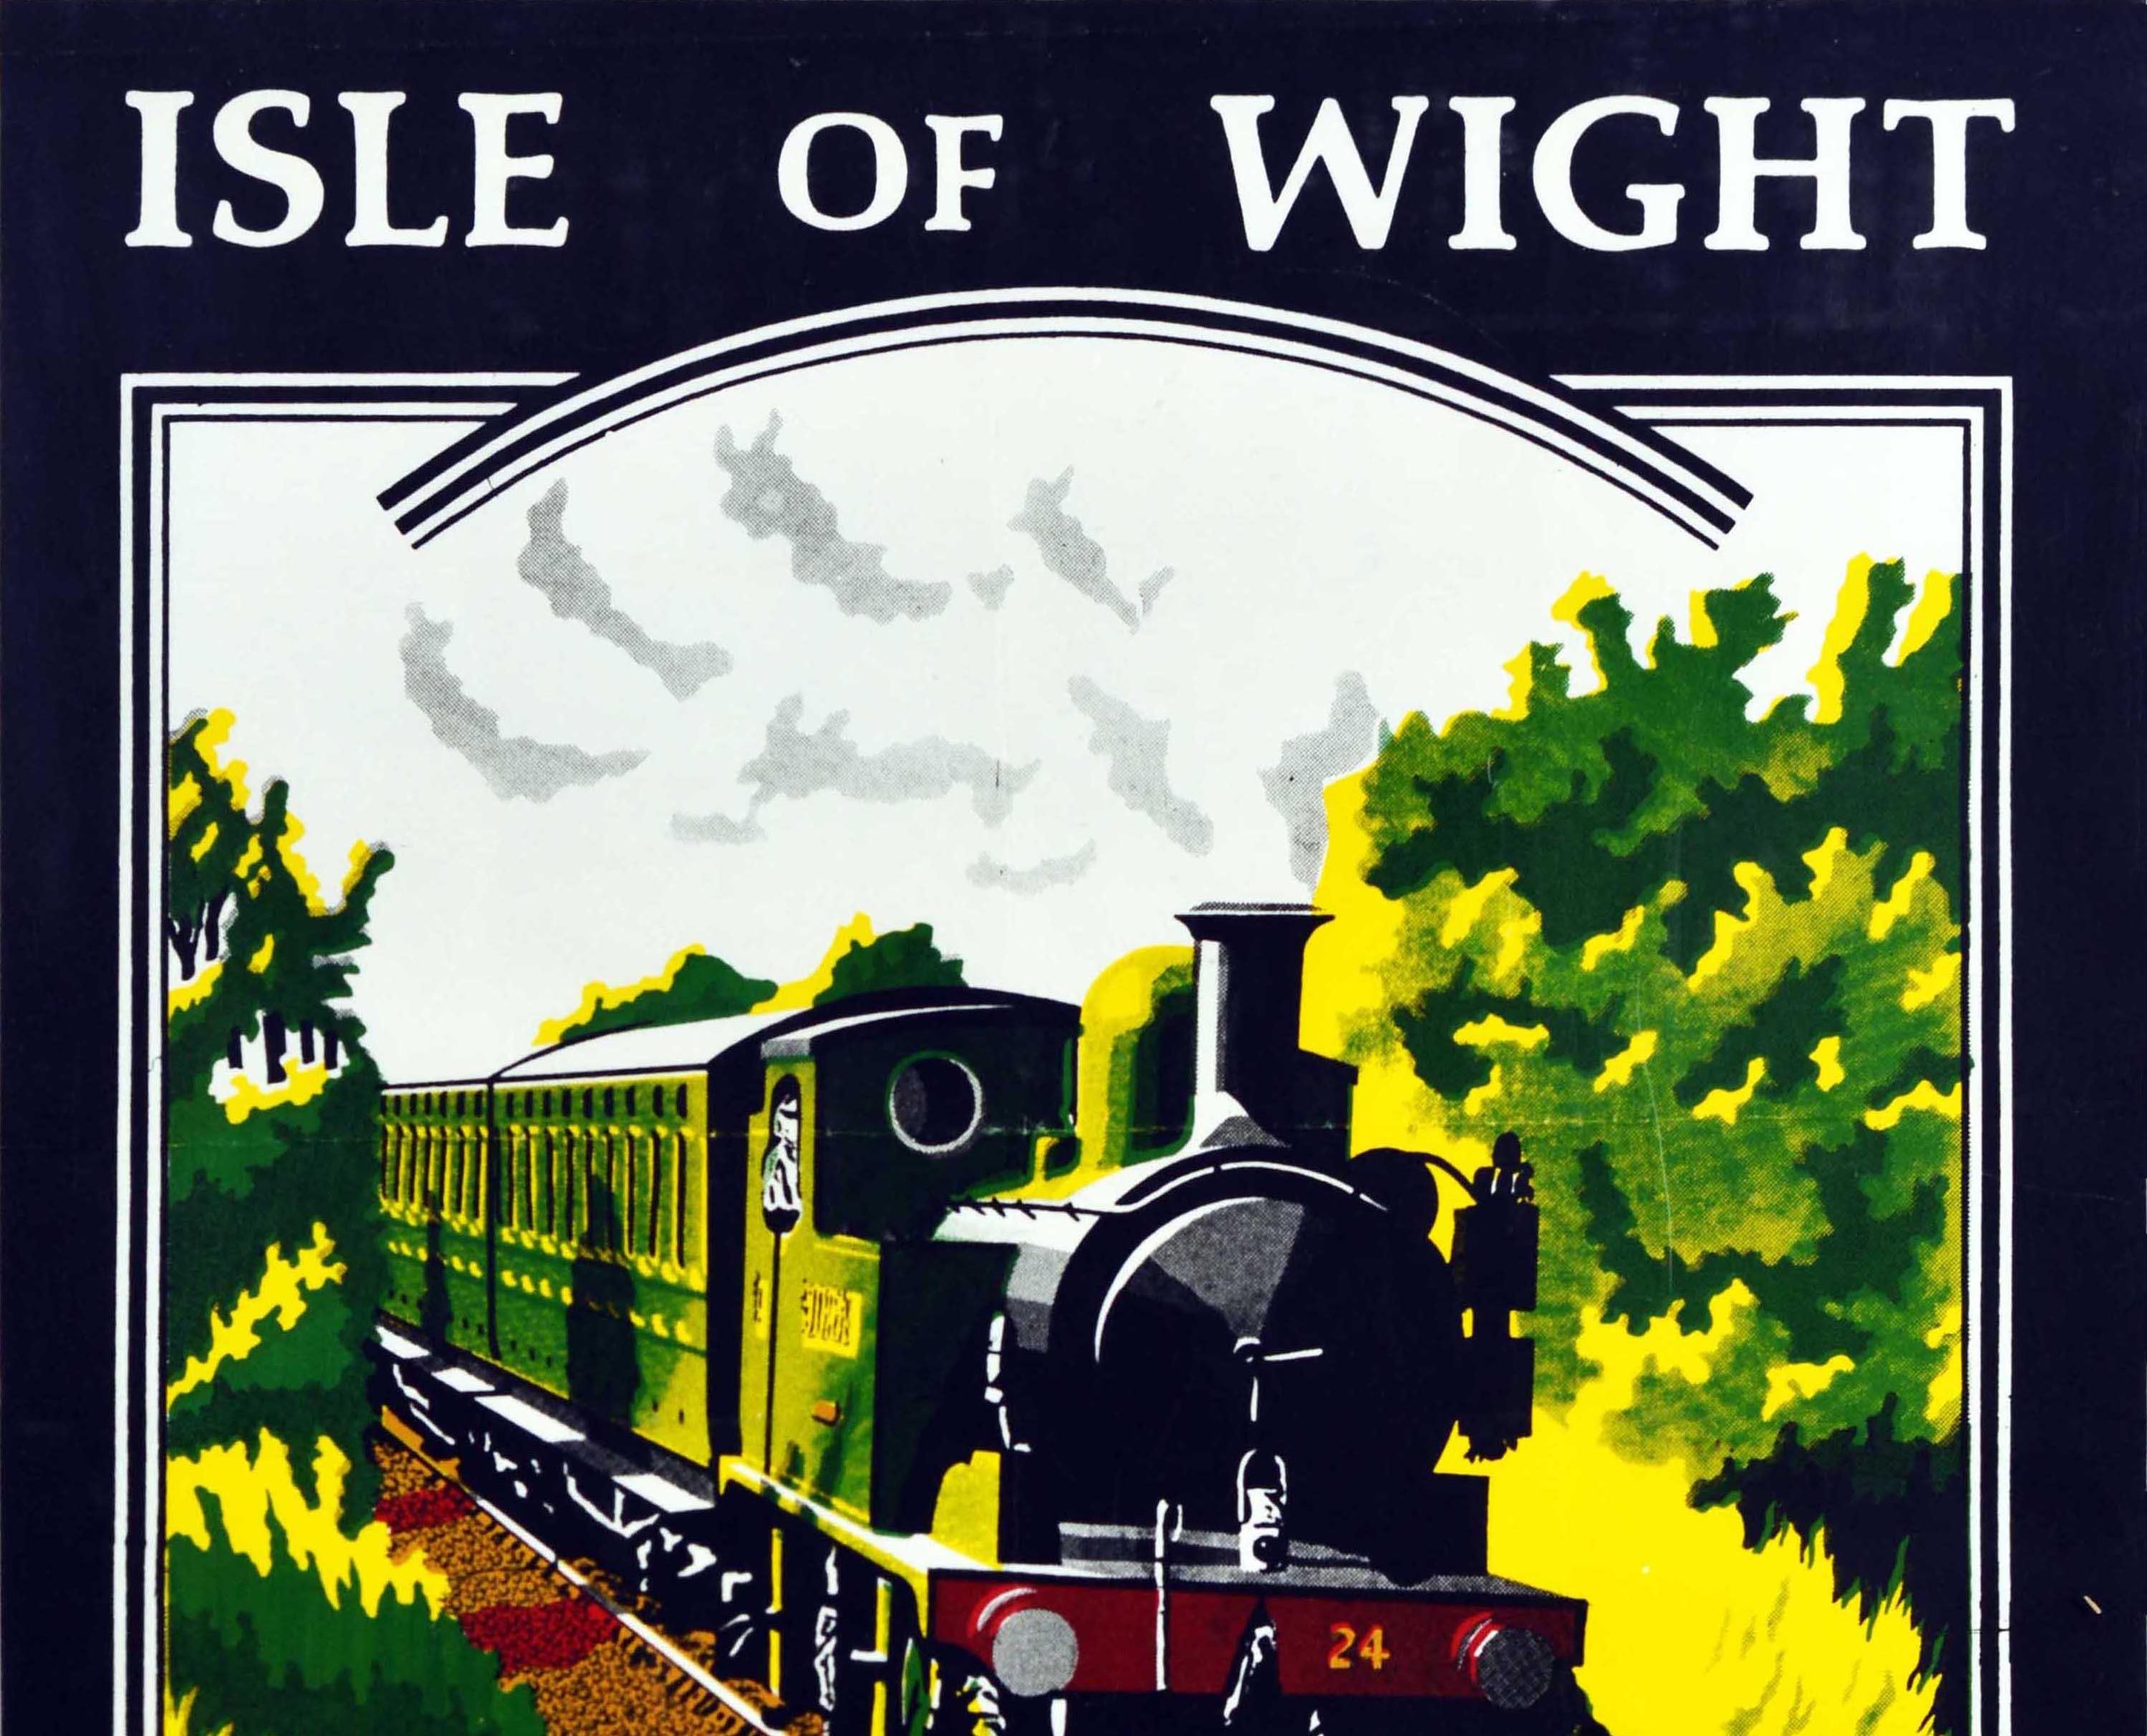 Original vintage travel poster for the Isle of Wight Steam Railway featuring a colourful image of a steam train on a scenic railway line between trees set within a black lined border, the bold title text in white and information on the timetable and